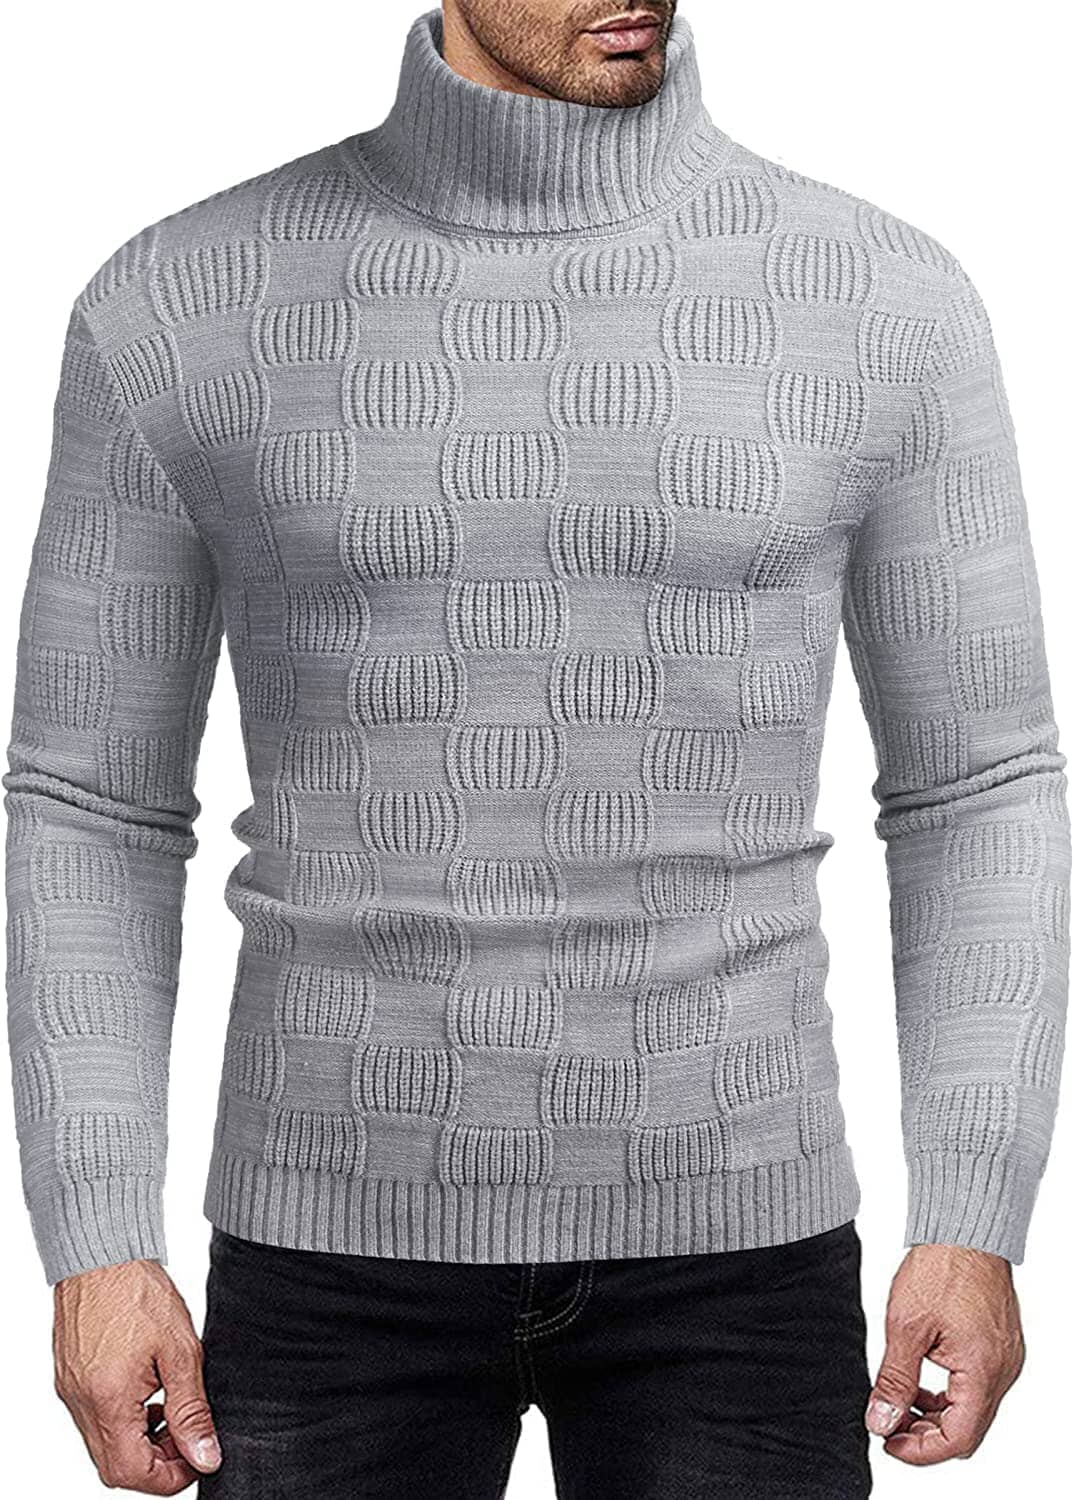 Men's Knitted Turtleneck Sweater Plaid Hightneck Long Sleeve Sweater (US Only) Sweaters COOFANDY Store Light Grey S 